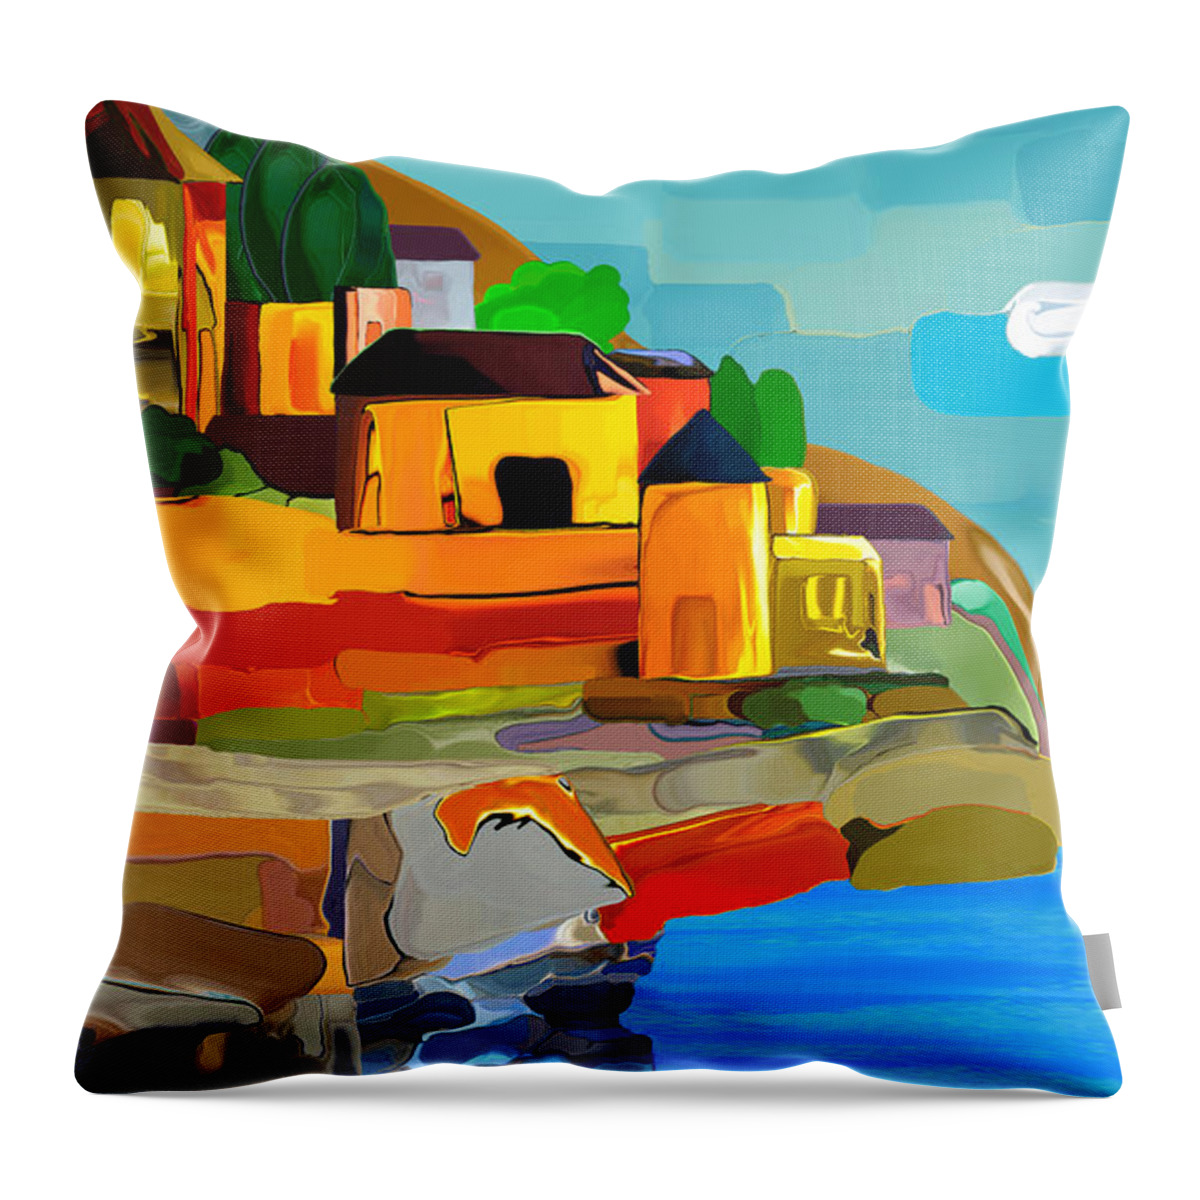 Village Painting Throw Pillow featuring the digital art Swiss Village by Haleh Mahbod